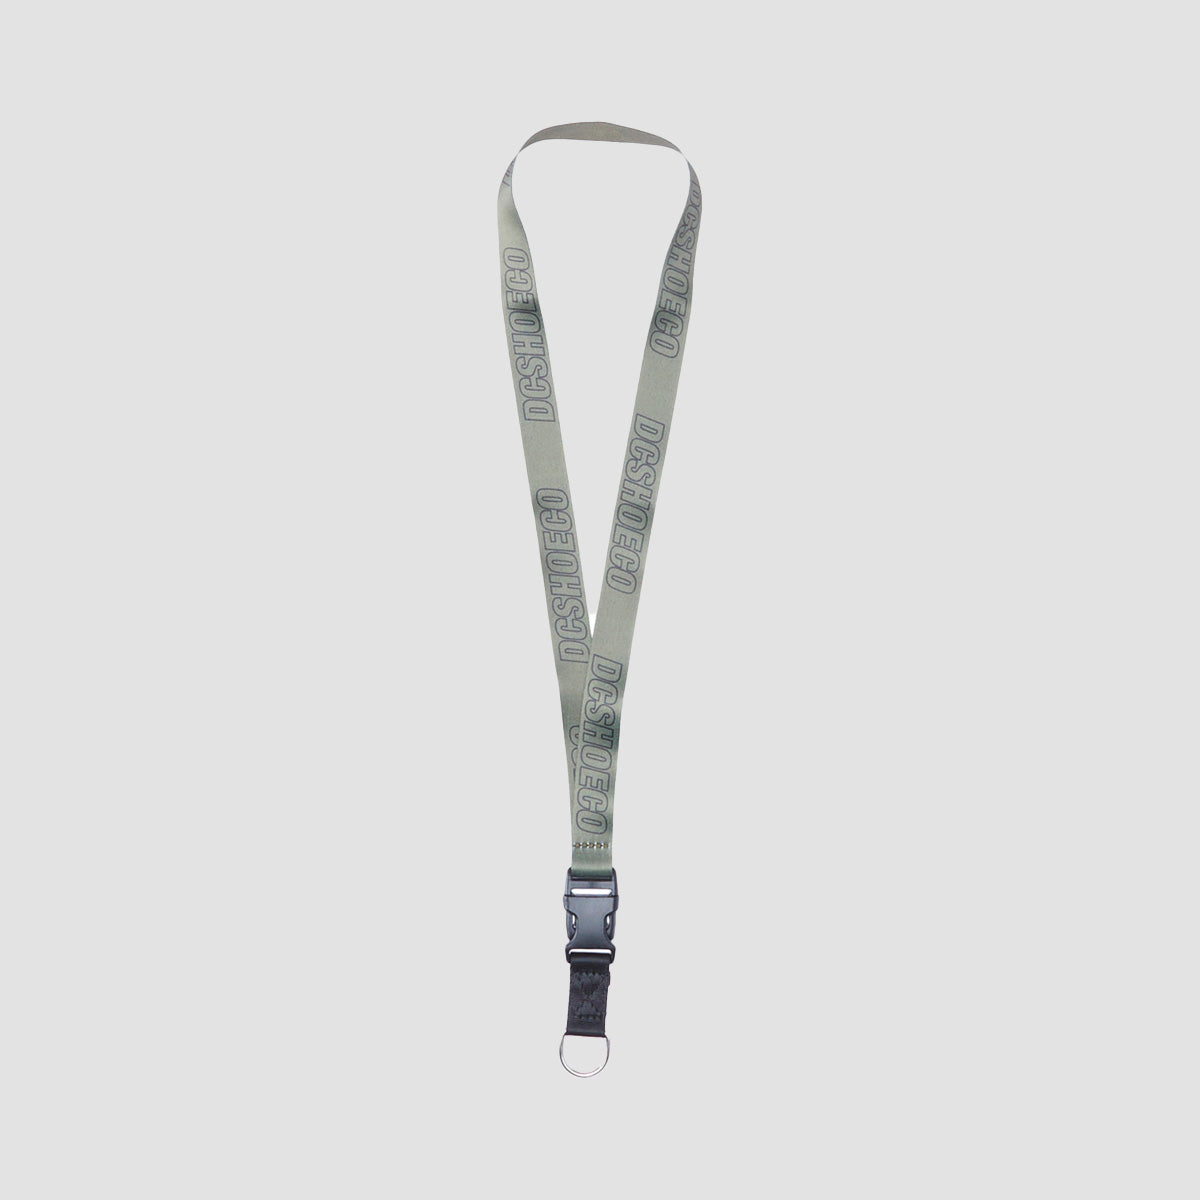 DC Lanyard Capers